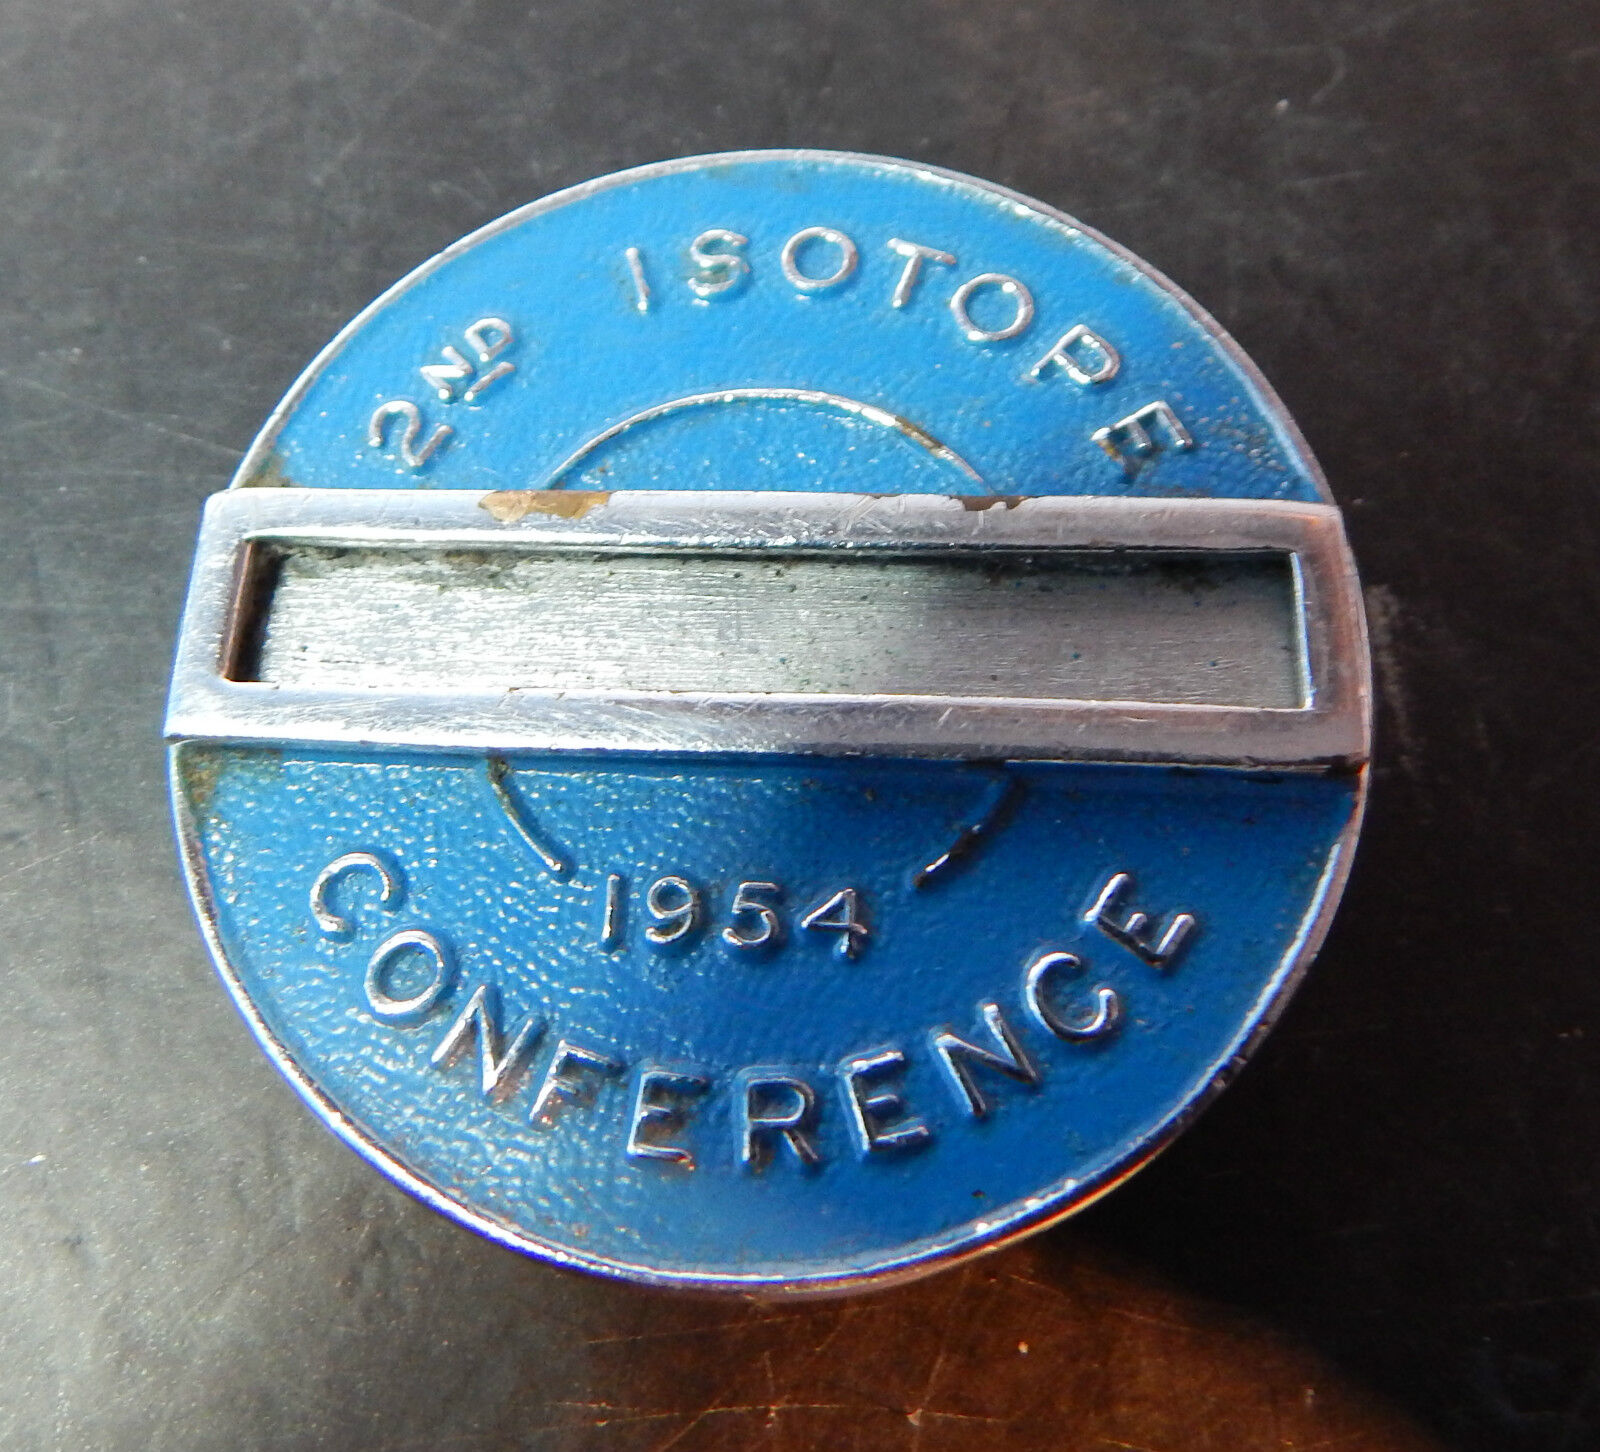 1954 2nd Isotope conference delegates badge . Very rare 4.5 cms